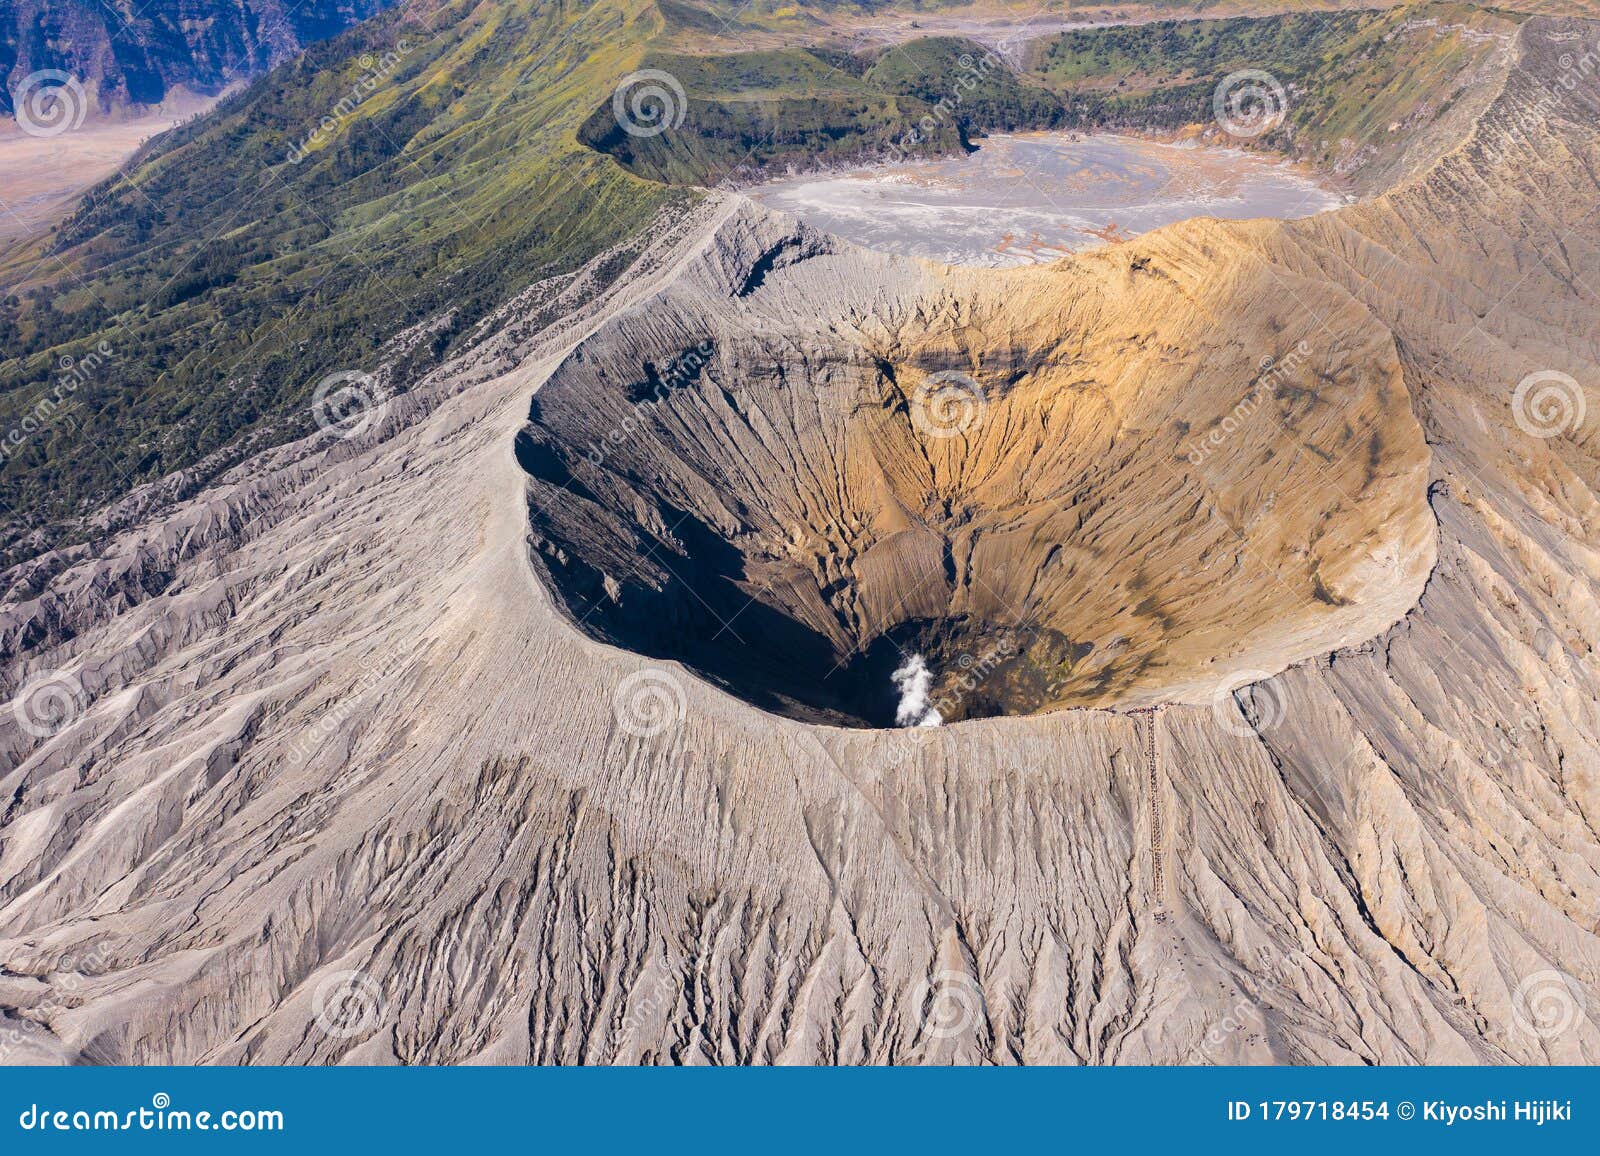 Mount Bromo Crater Top View in East Java, Indonesia Stock Photo - Image